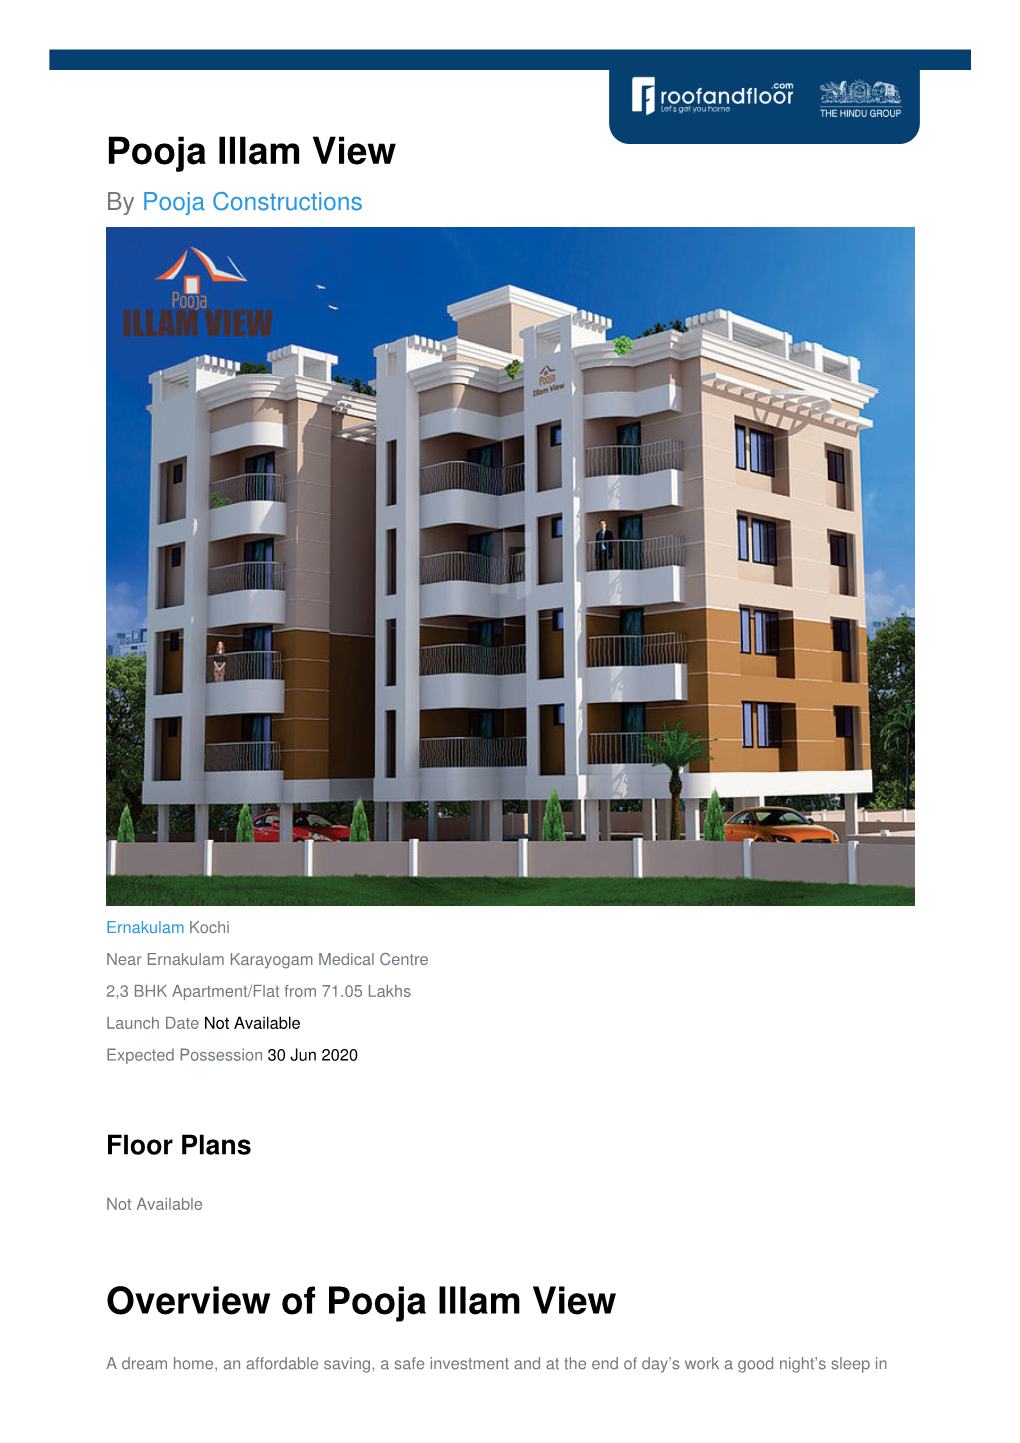 Pooja Illam View by Pooja Constructions